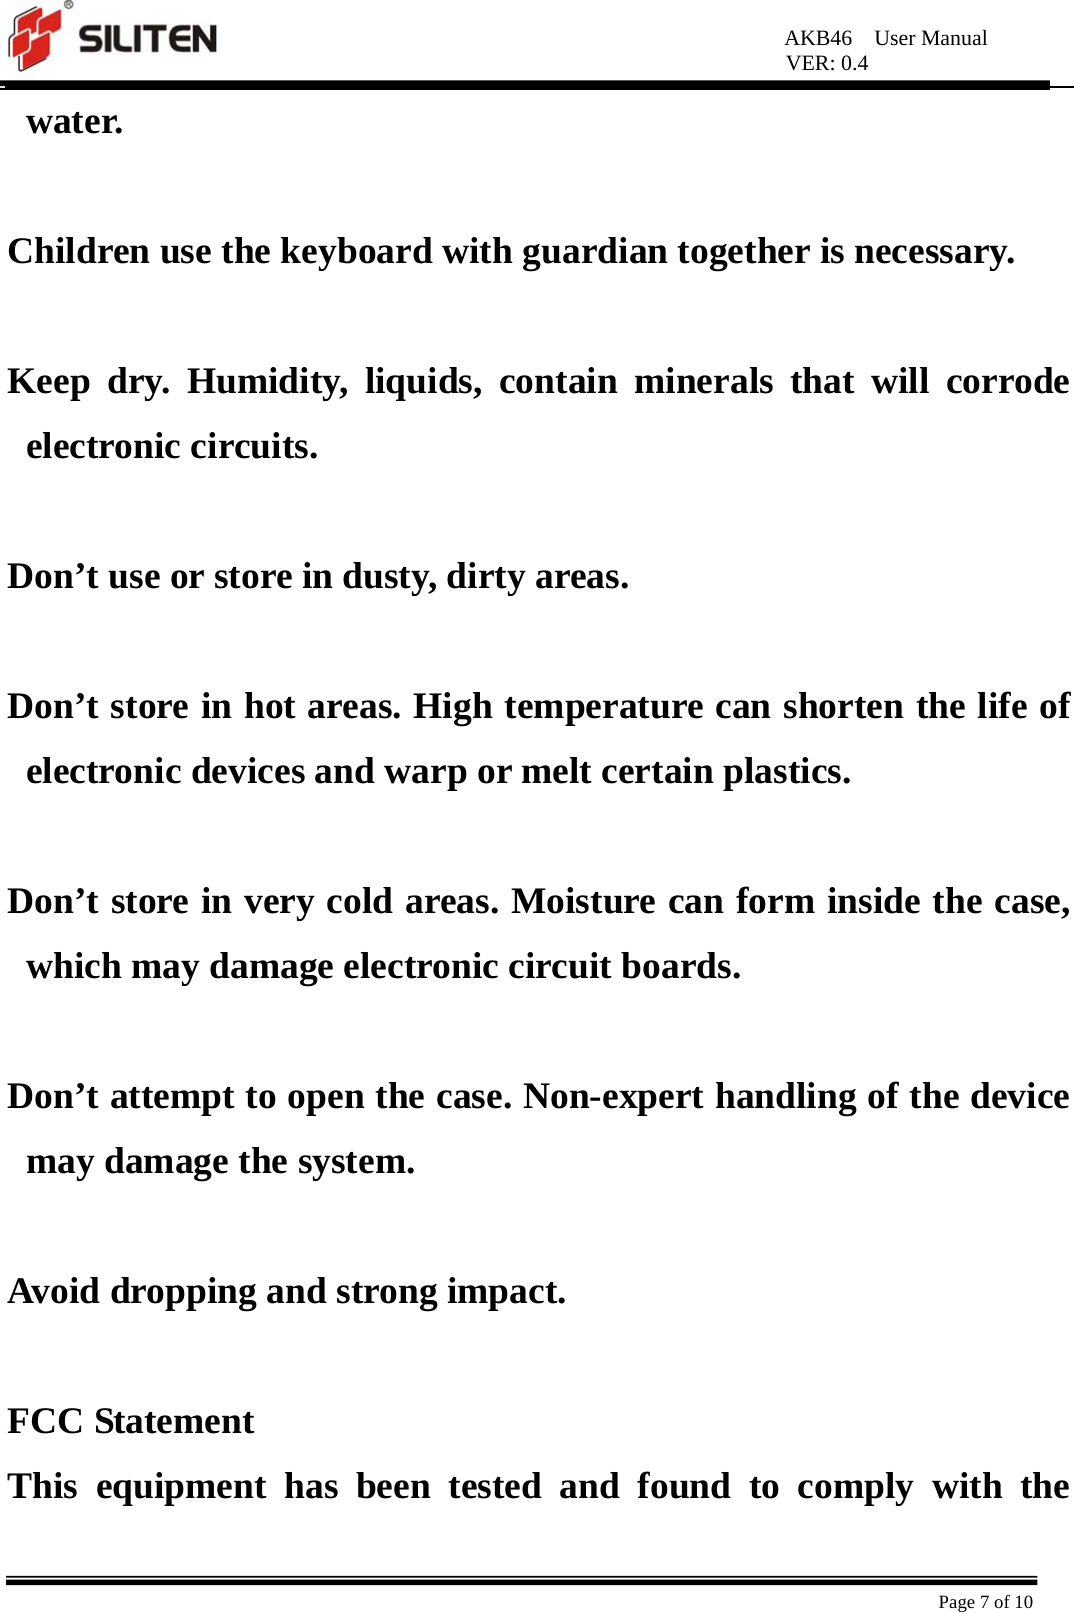 AKB46  User Manual VER: 0.4  Page 7 of 10 water.  Children use the keyboard with guardian together is necessary.  Keep dry. Humidity, liquids, contain minerals that will corrode electronic circuits.  Don’t use or store in dusty, dirty areas.  Don’t store in hot areas. High temperature can shorten the life of electronic devices and warp or melt certain plastics.  Don’t store in very cold areas. Moisture can form inside the case, which may damage electronic circuit boards.  Don’t attempt to open the case. Non-expert handling of the device may damage the system.    Avoid dropping and strong impact.  FCC Statement   This equipment has been tested and found to comply with the 